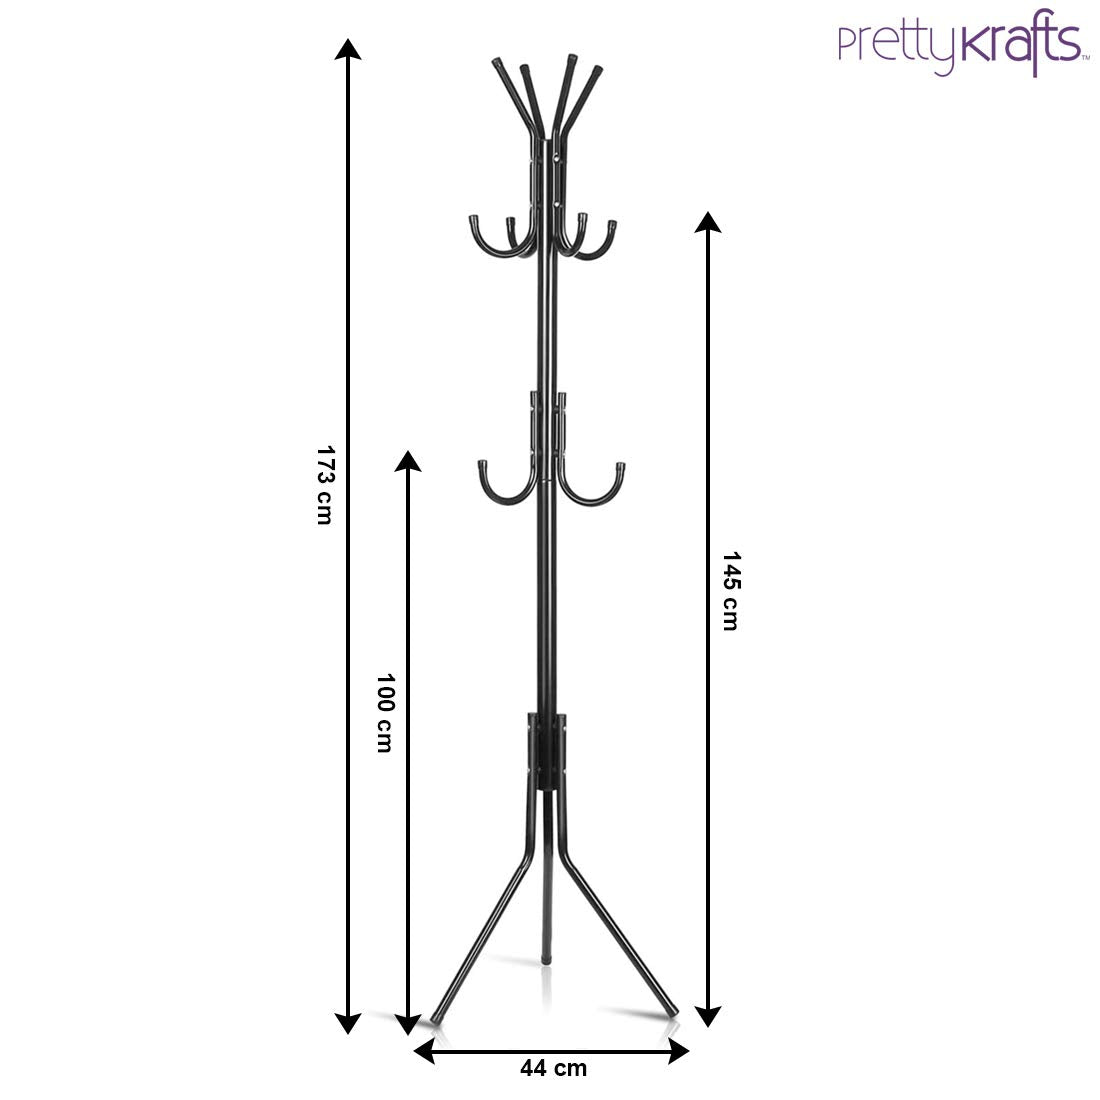 6 Hook Coat Hanger Clothes Stand Hanging Pole Wrought Iron Rack Standing Shelf Unit for Home, Bedroom Space